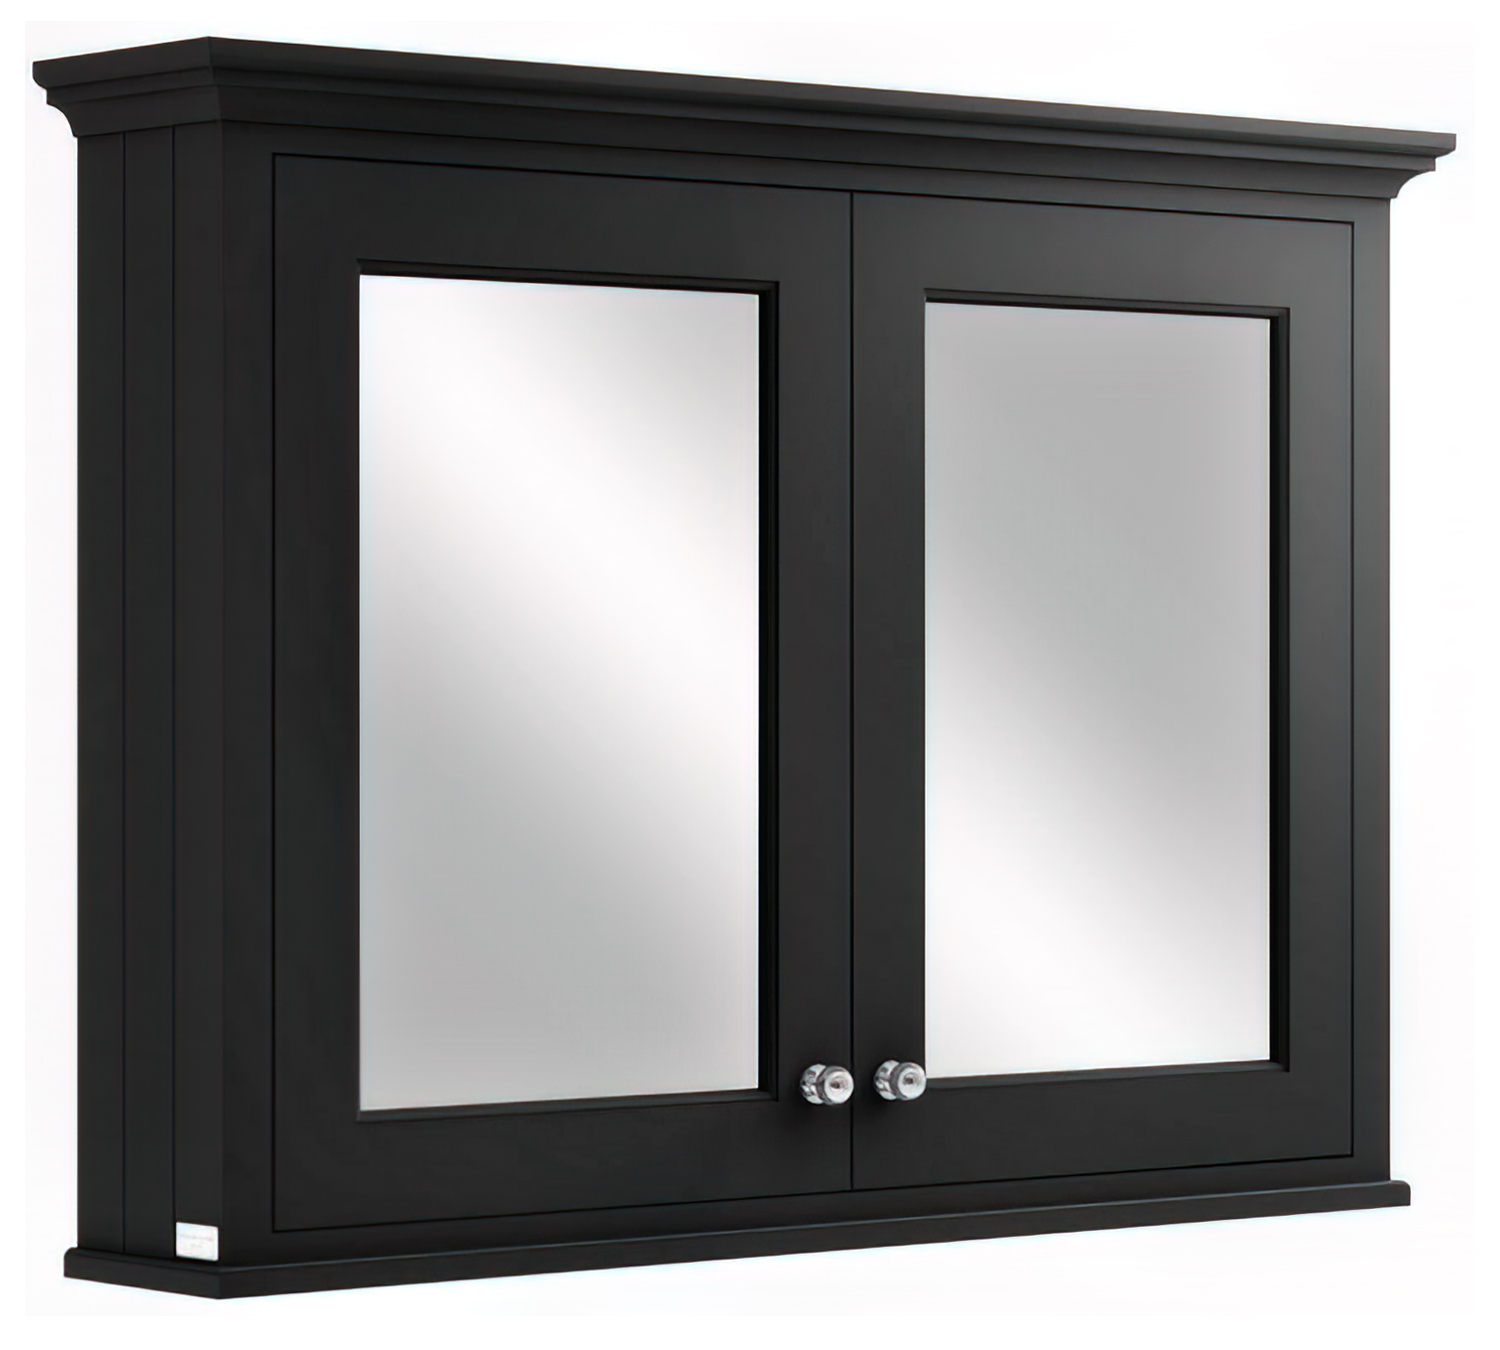 Bayswater 1050mm Wall Mounted Mirror Cabinet | BAYF131